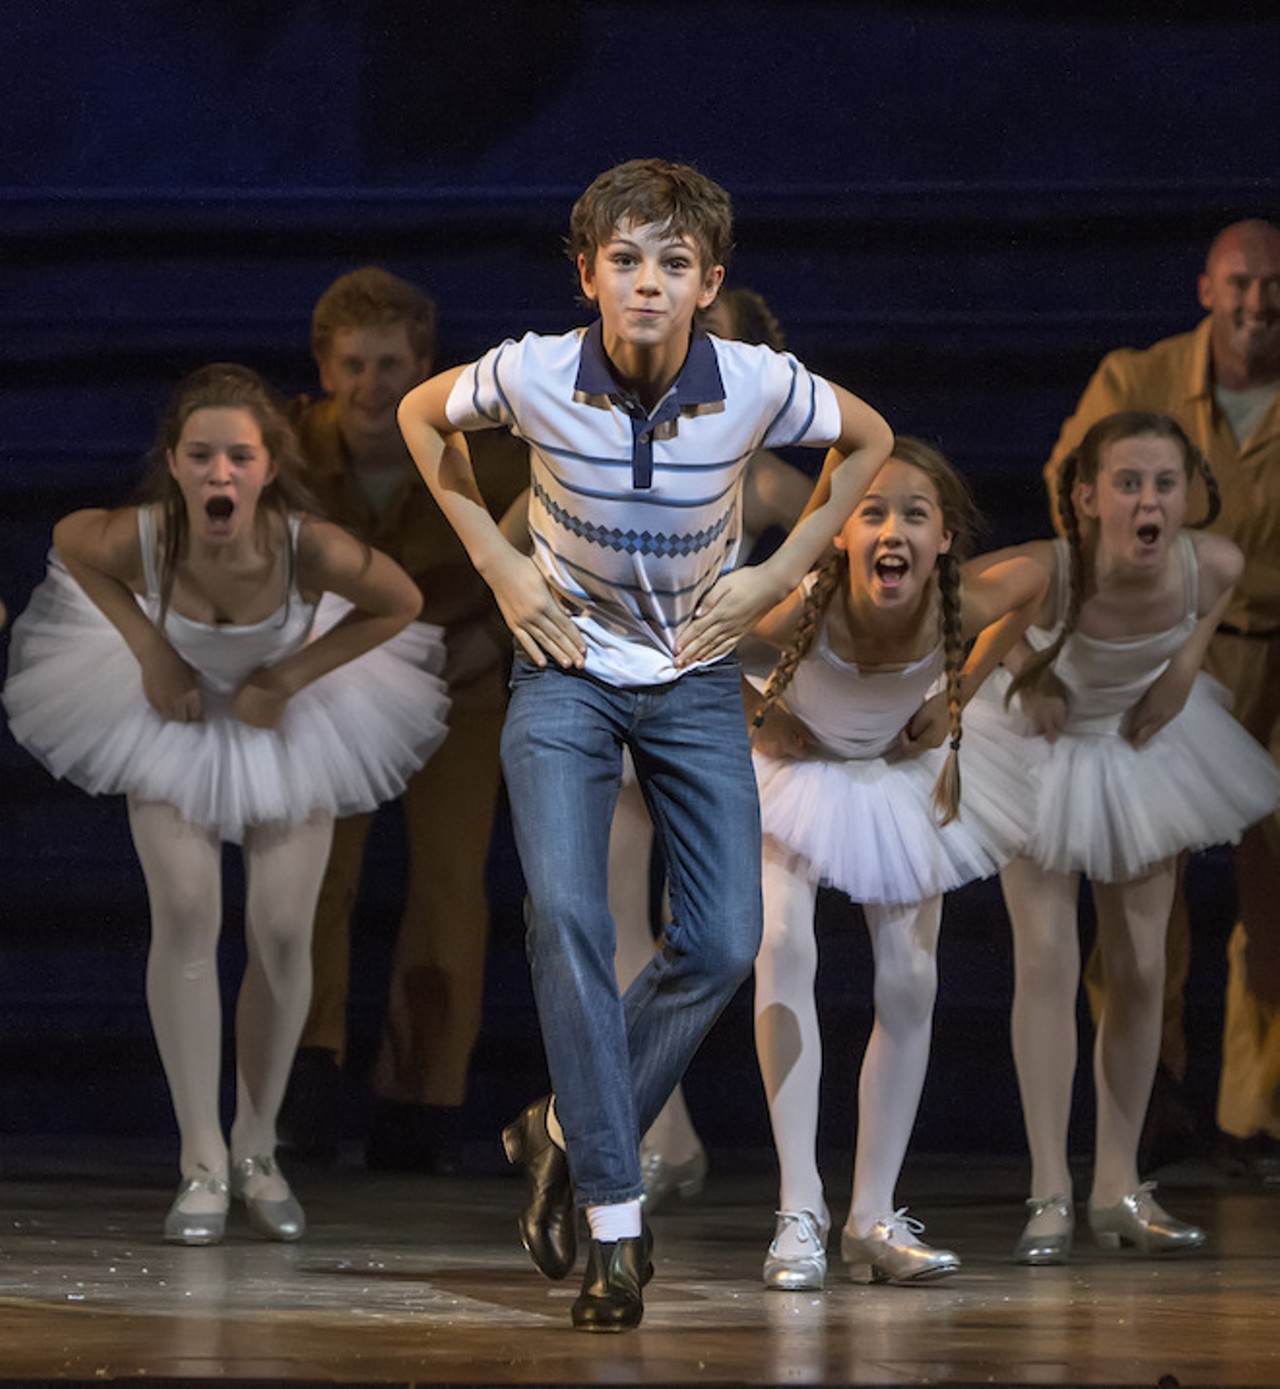 Billy Elliot the Musical Live at the Victoria Palace Theatre - Photographer Adam Sorenson
Mandatory credit
Elliot Hanna and the Ballet girls